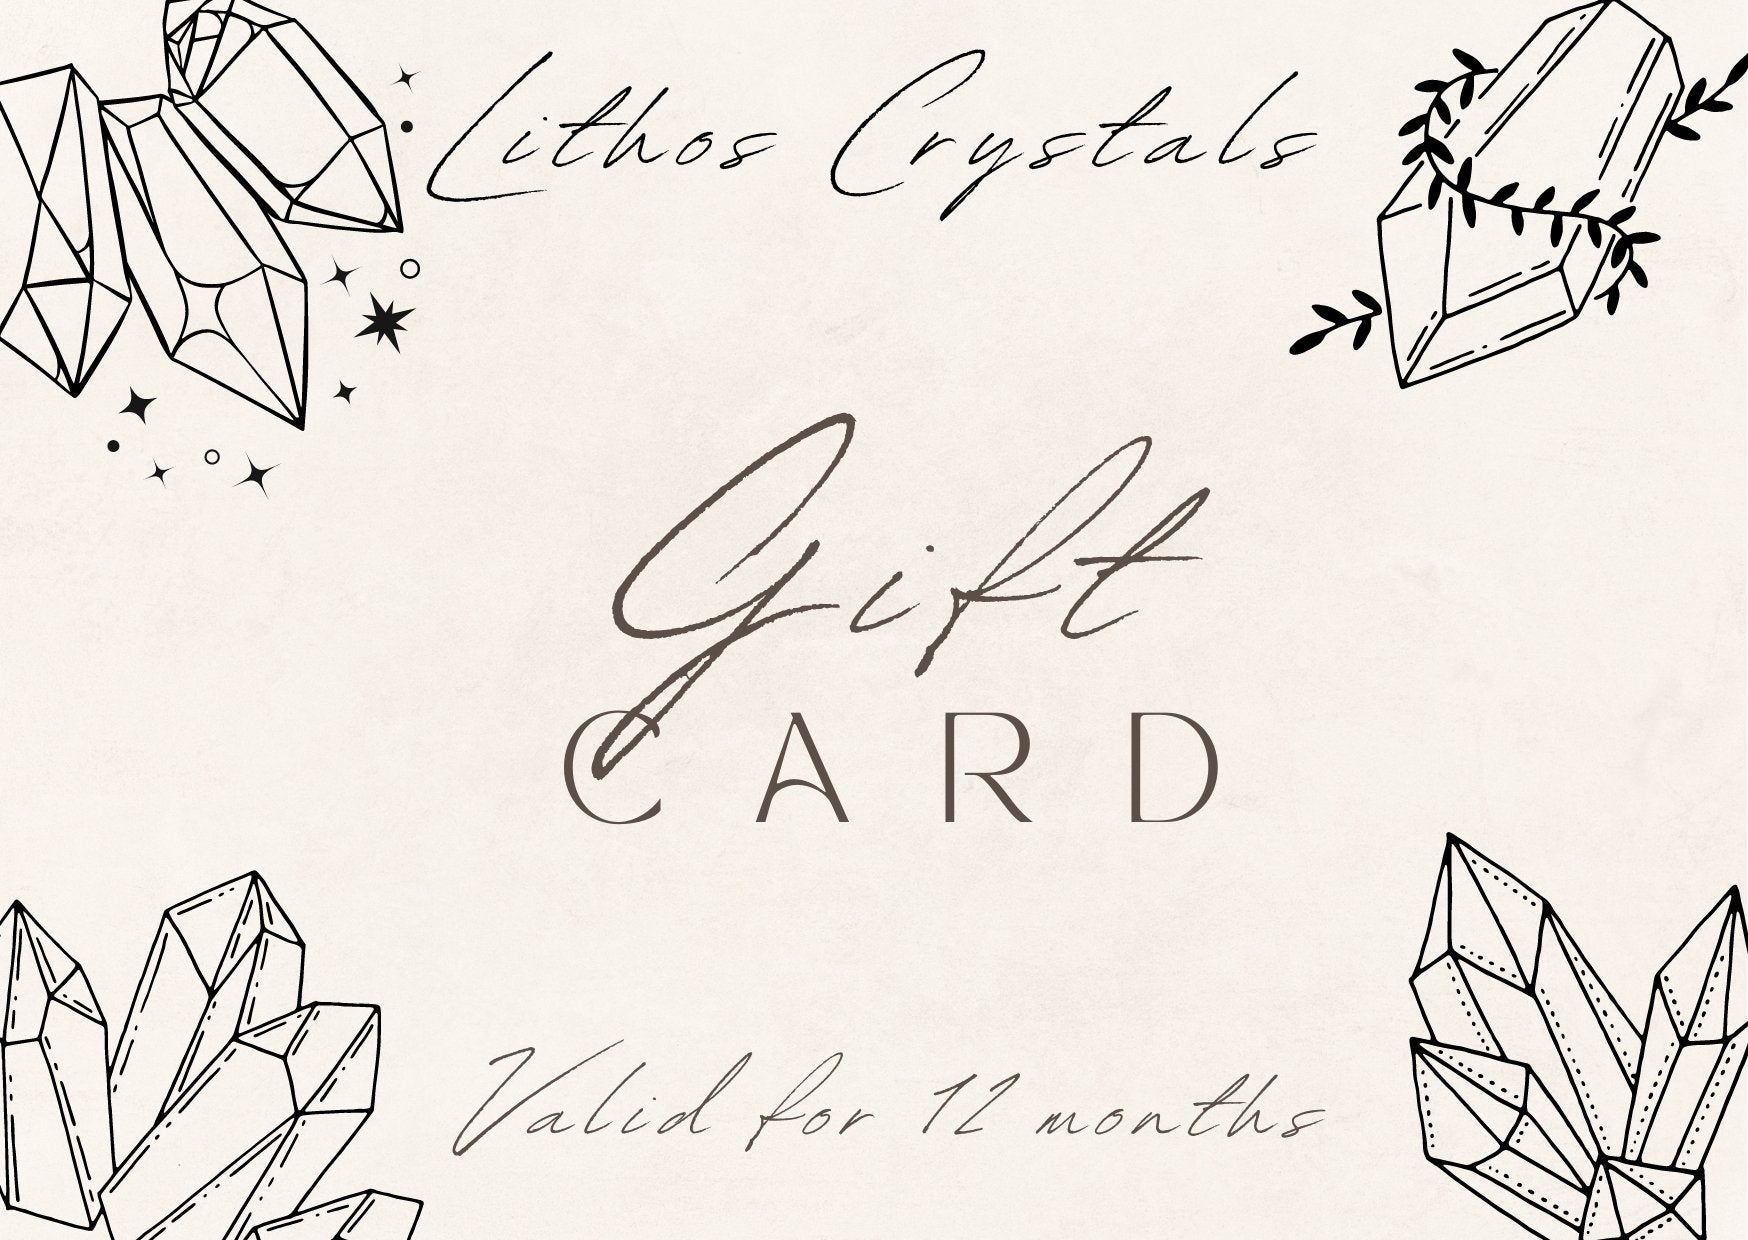 GIFT CARD - Lithos Crystals